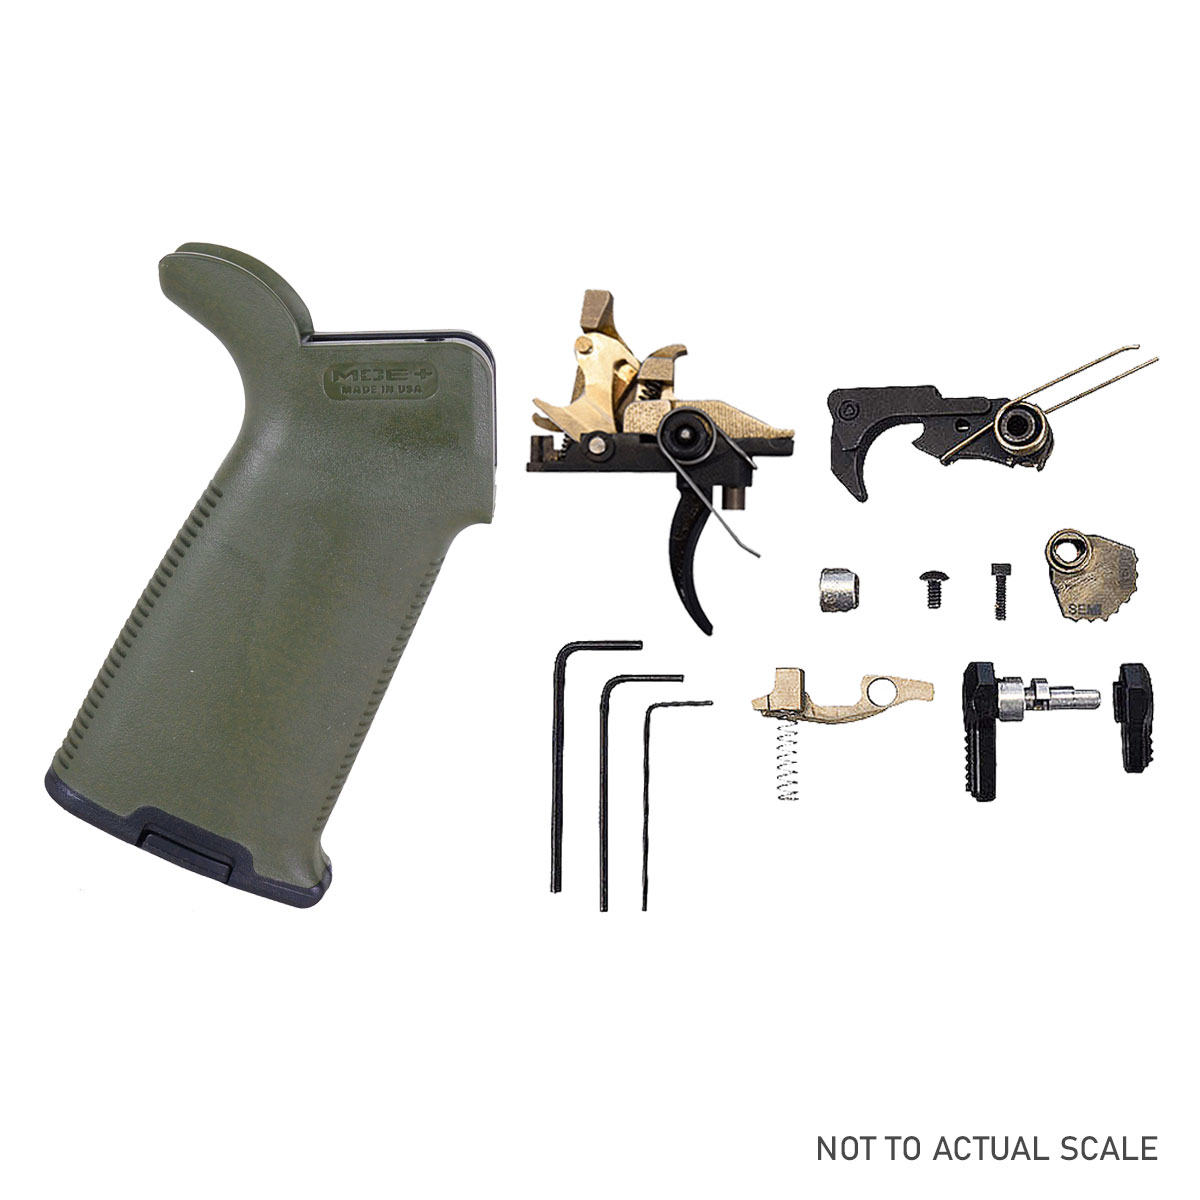 Speed Up Your Lower Kit: FosTecH Echo Sport Binary Trigger + Magpul Magpul Industries, MOE Grip, Fits AR Rifles, with Storage Compartment, Olive Drab Green